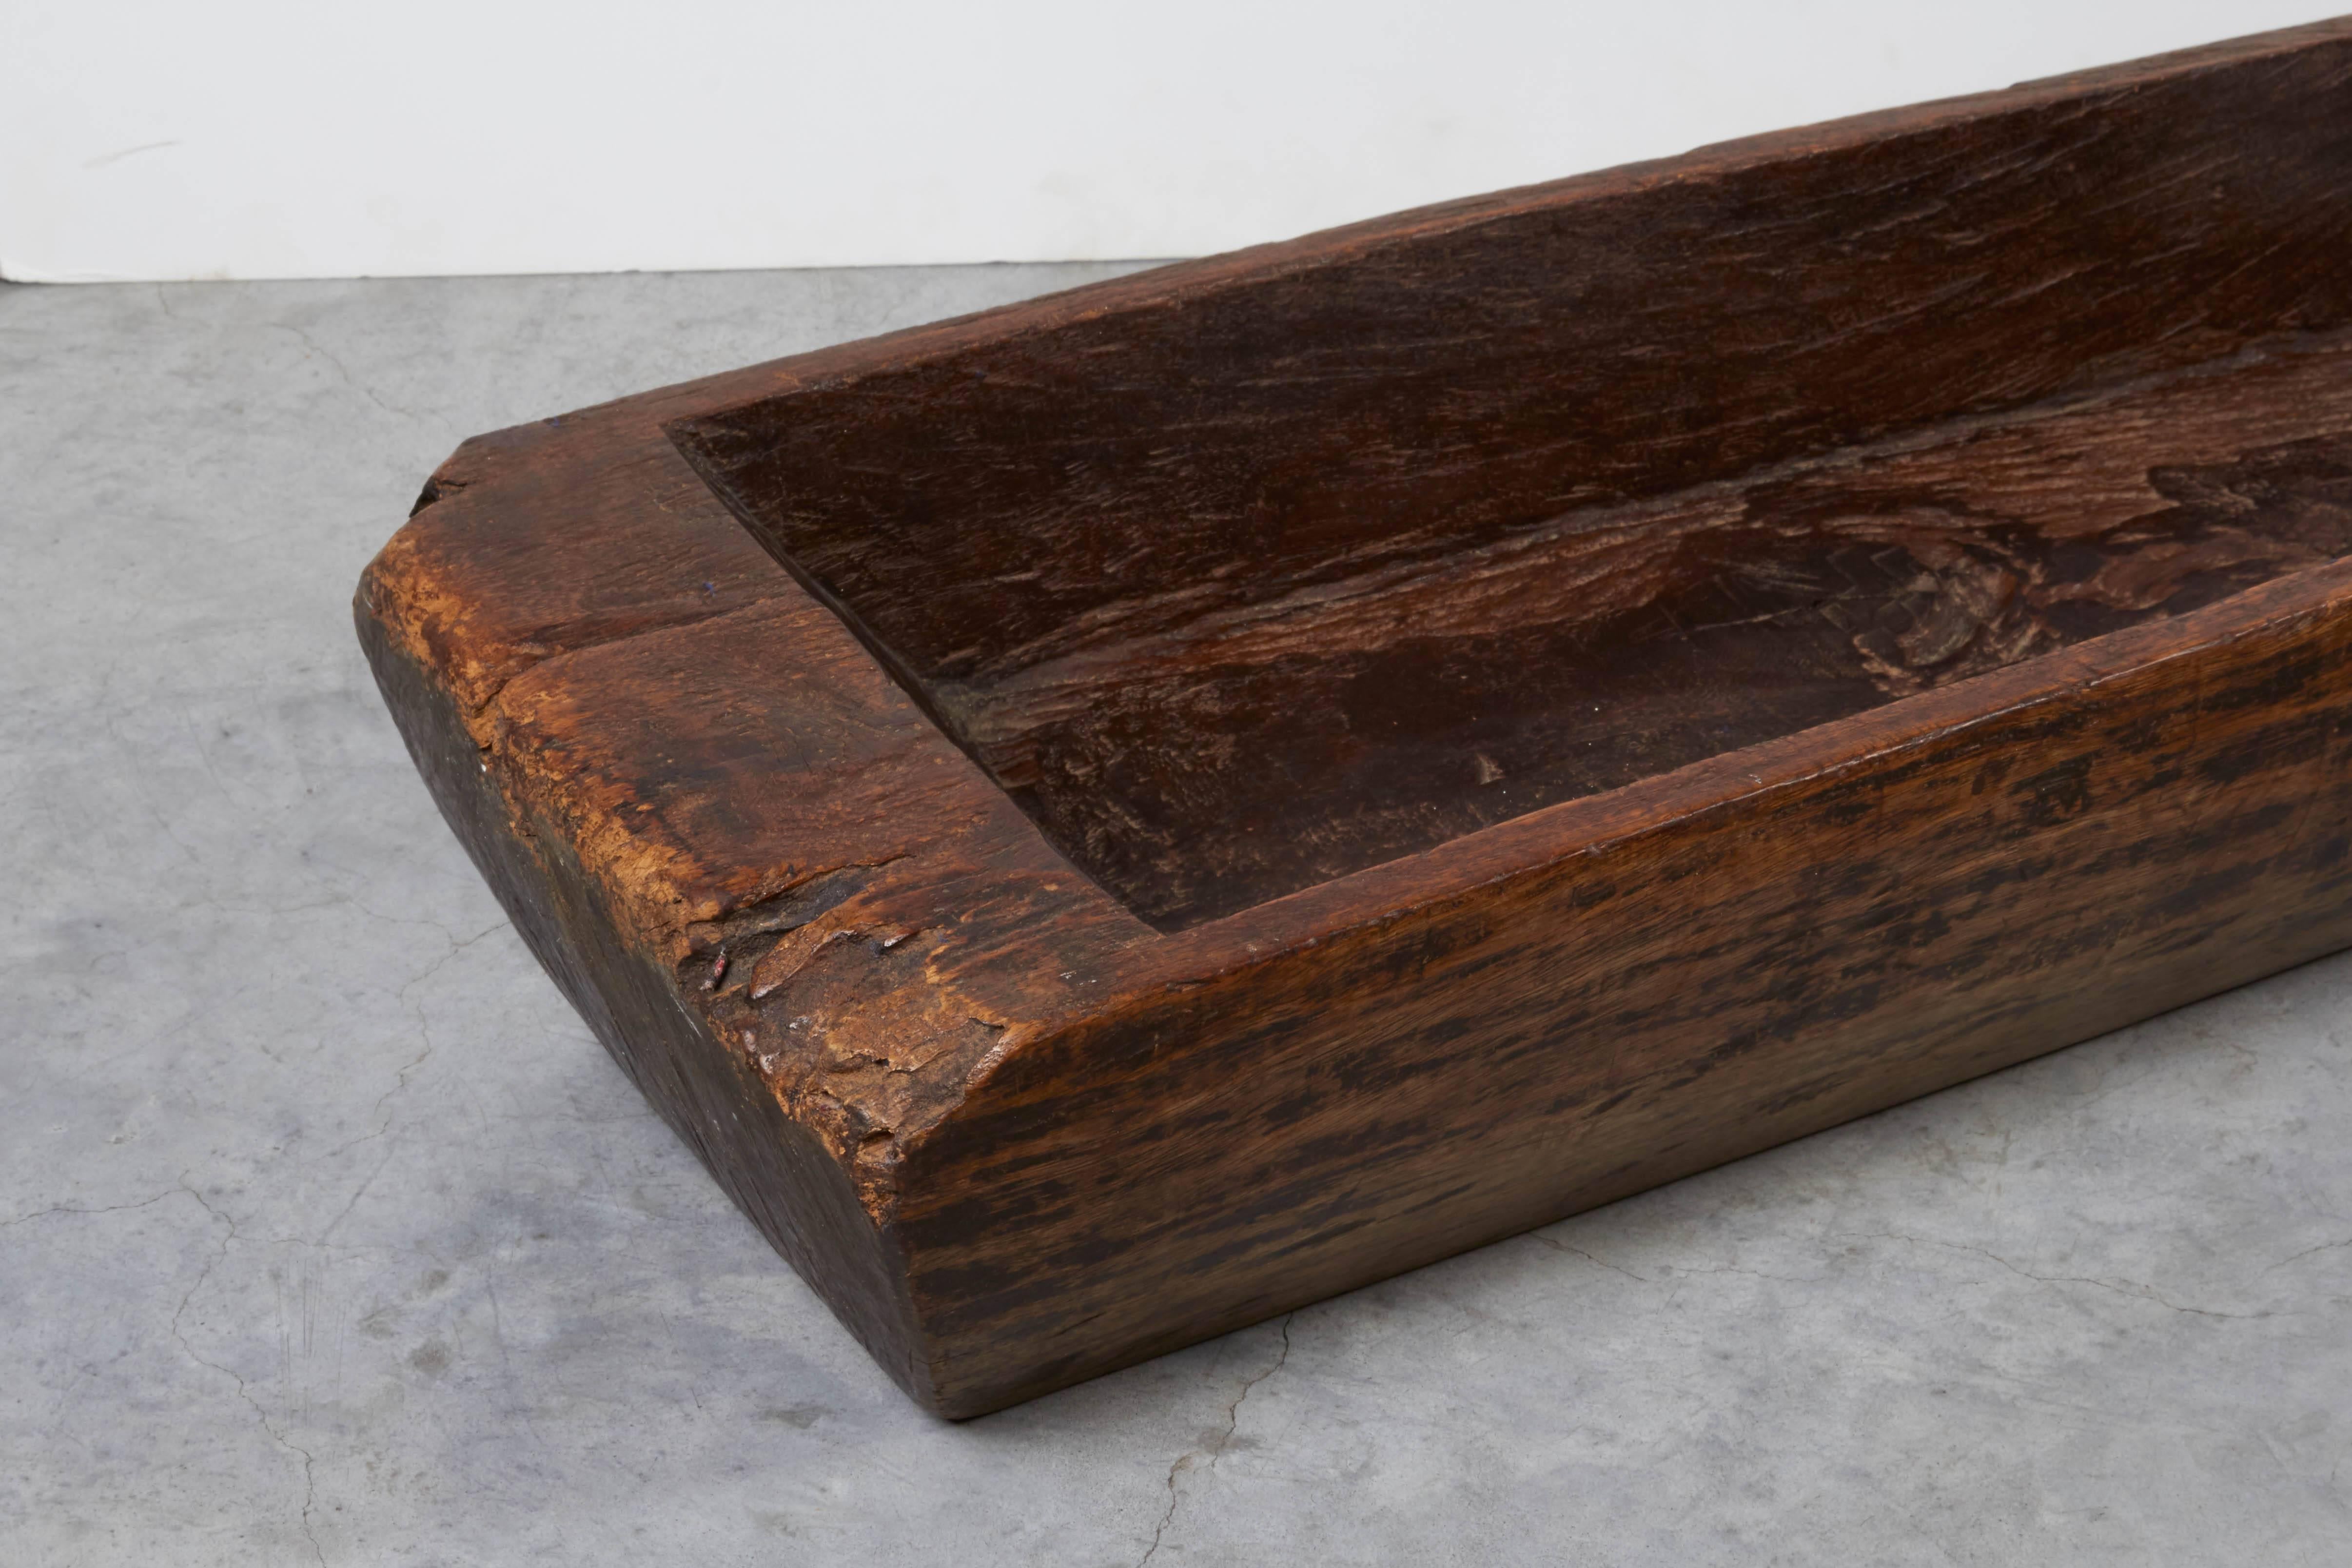 Large, Primitive, Thick Walled Antique Wooden Tray 2